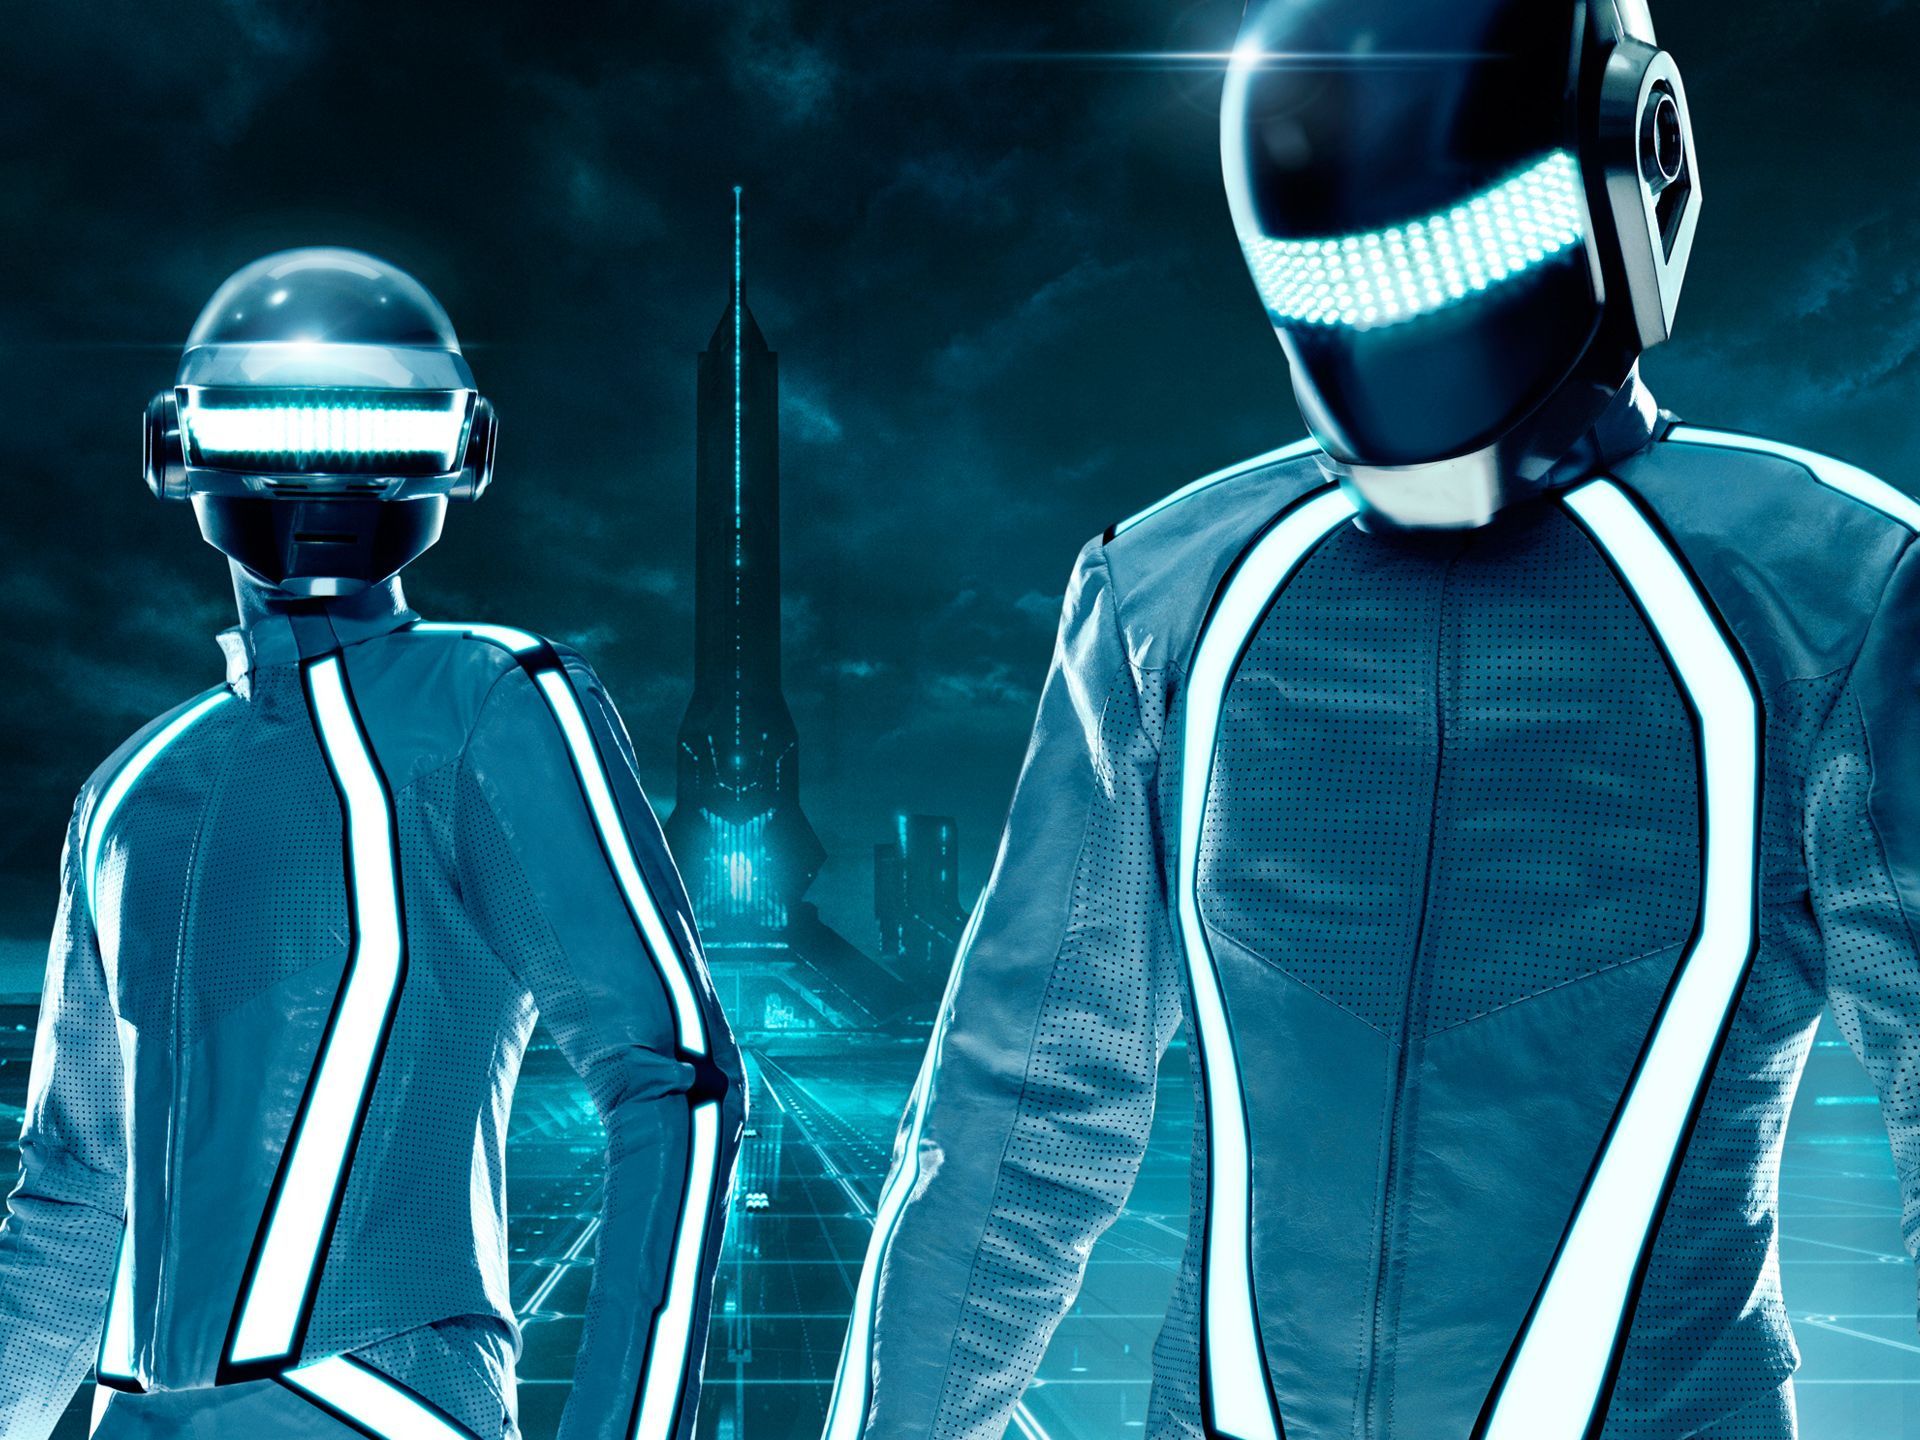 Daft Punk Duo Tron Legacy Wallpapers | HD Wallpapers